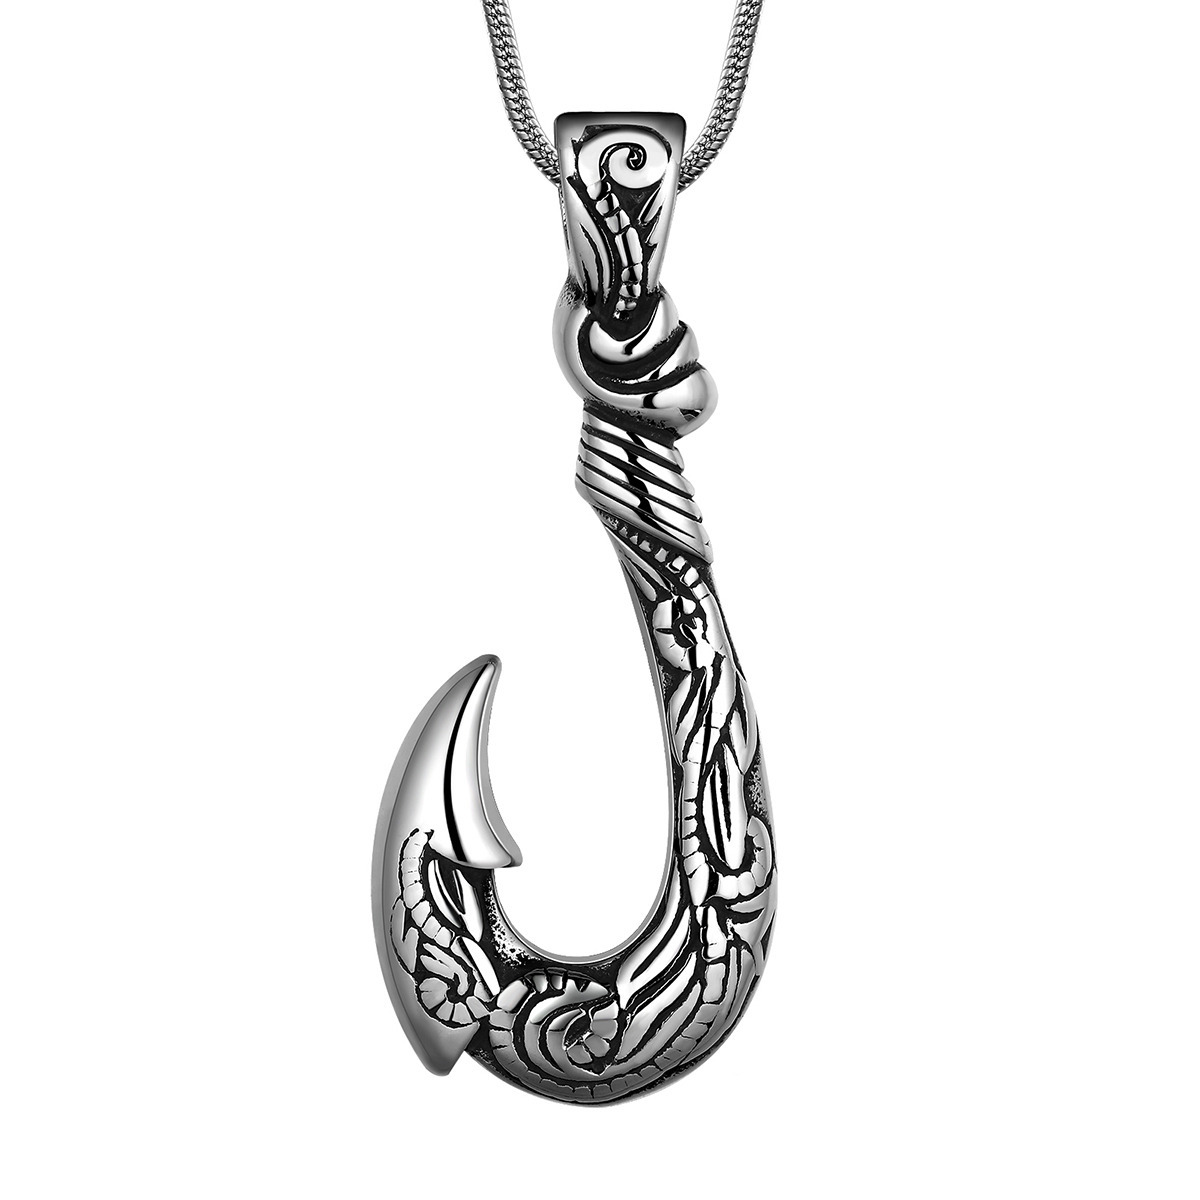 2022 New Men's Fashionable Fish Hook Pendant Stainless Steel